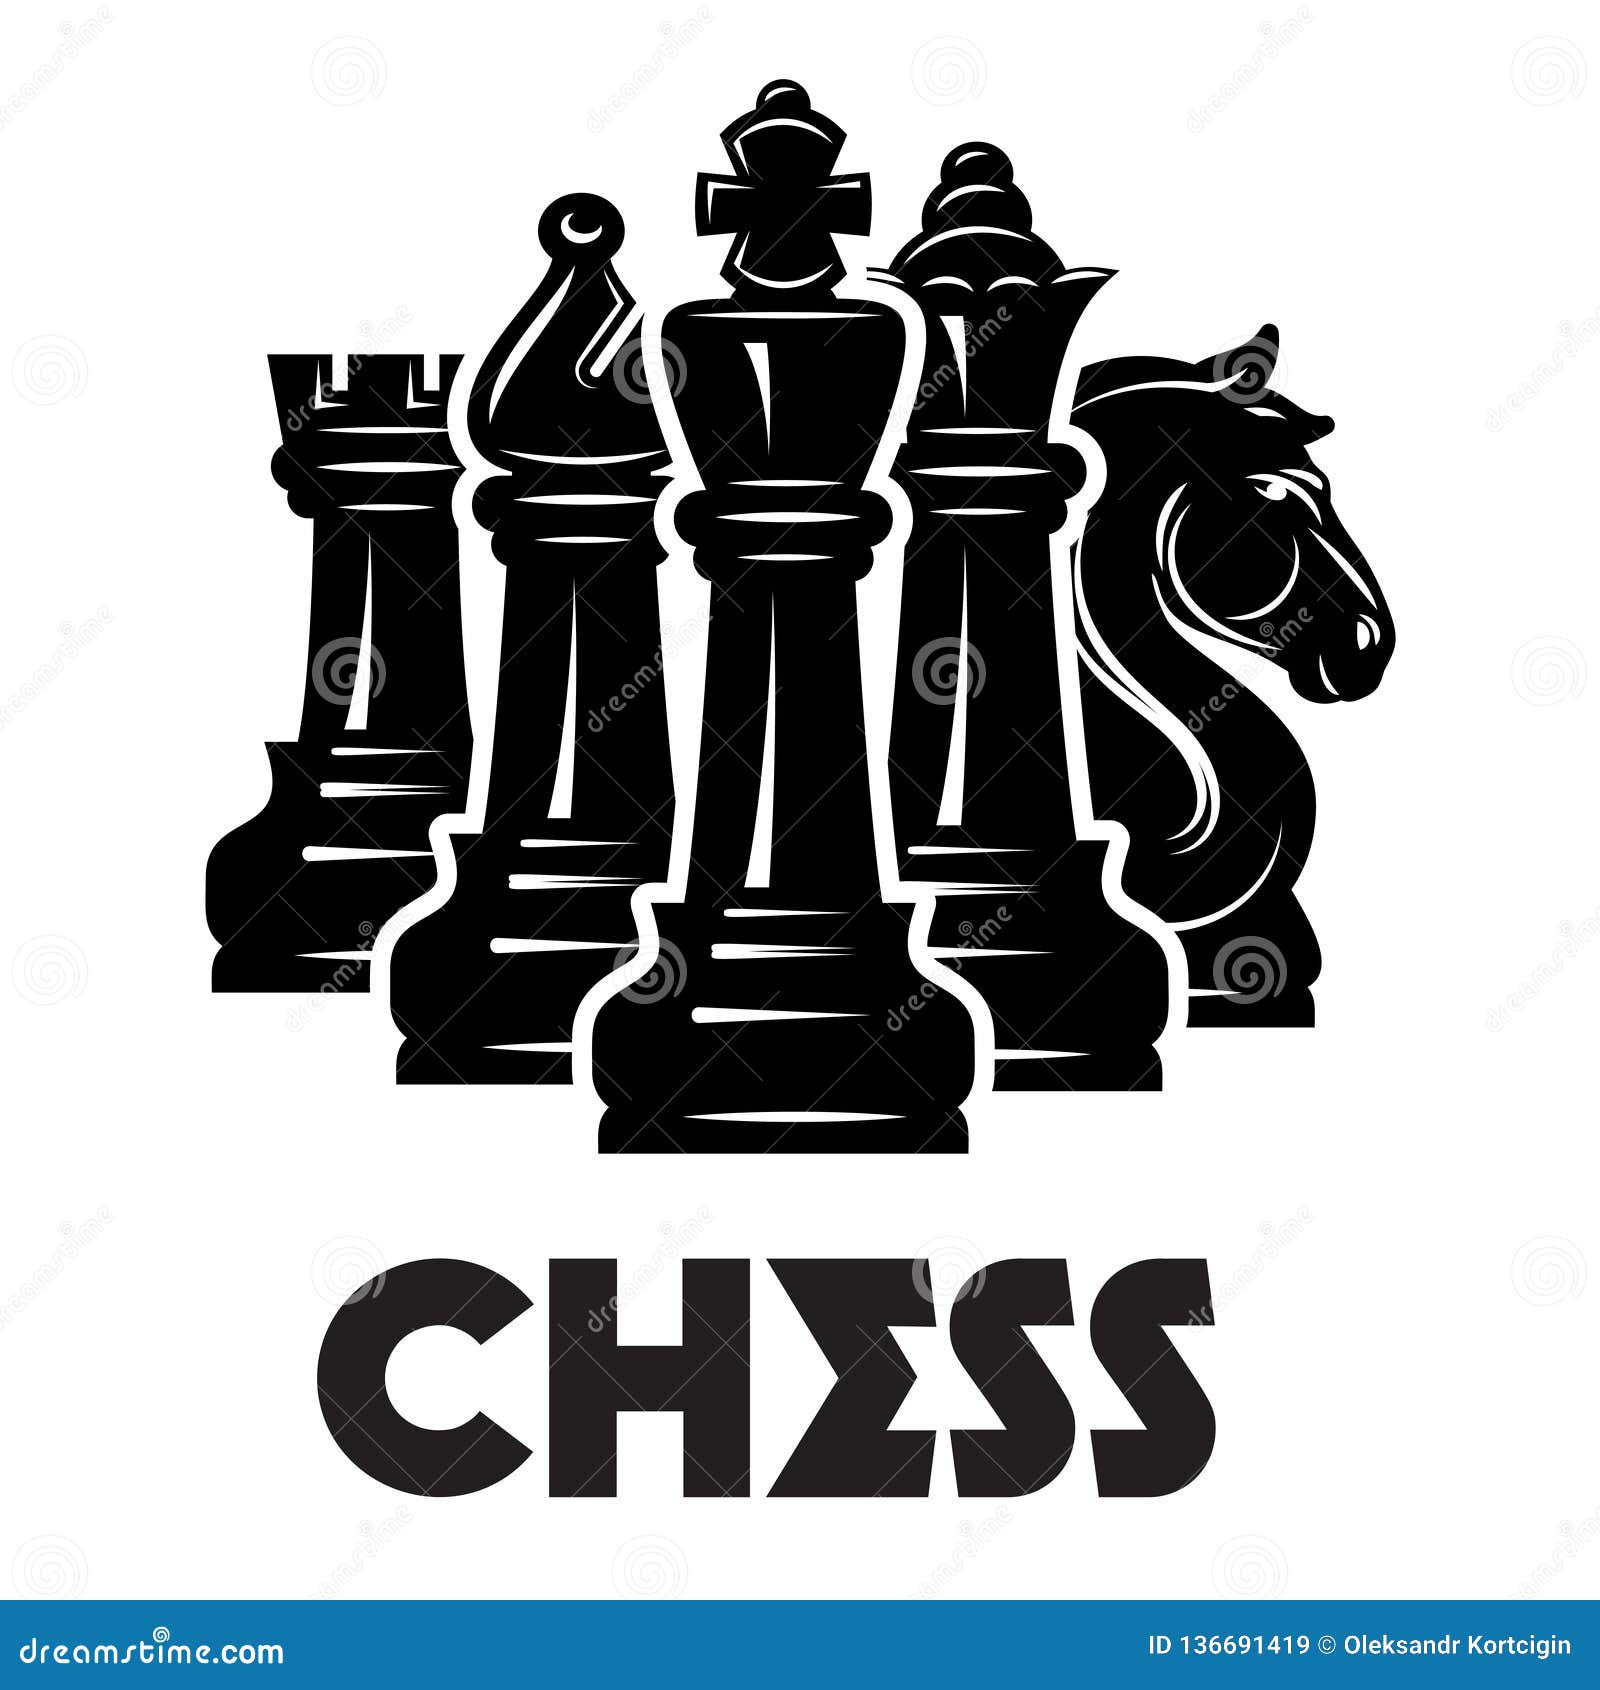  monochrome pattern on chess theme with chess and checkmate